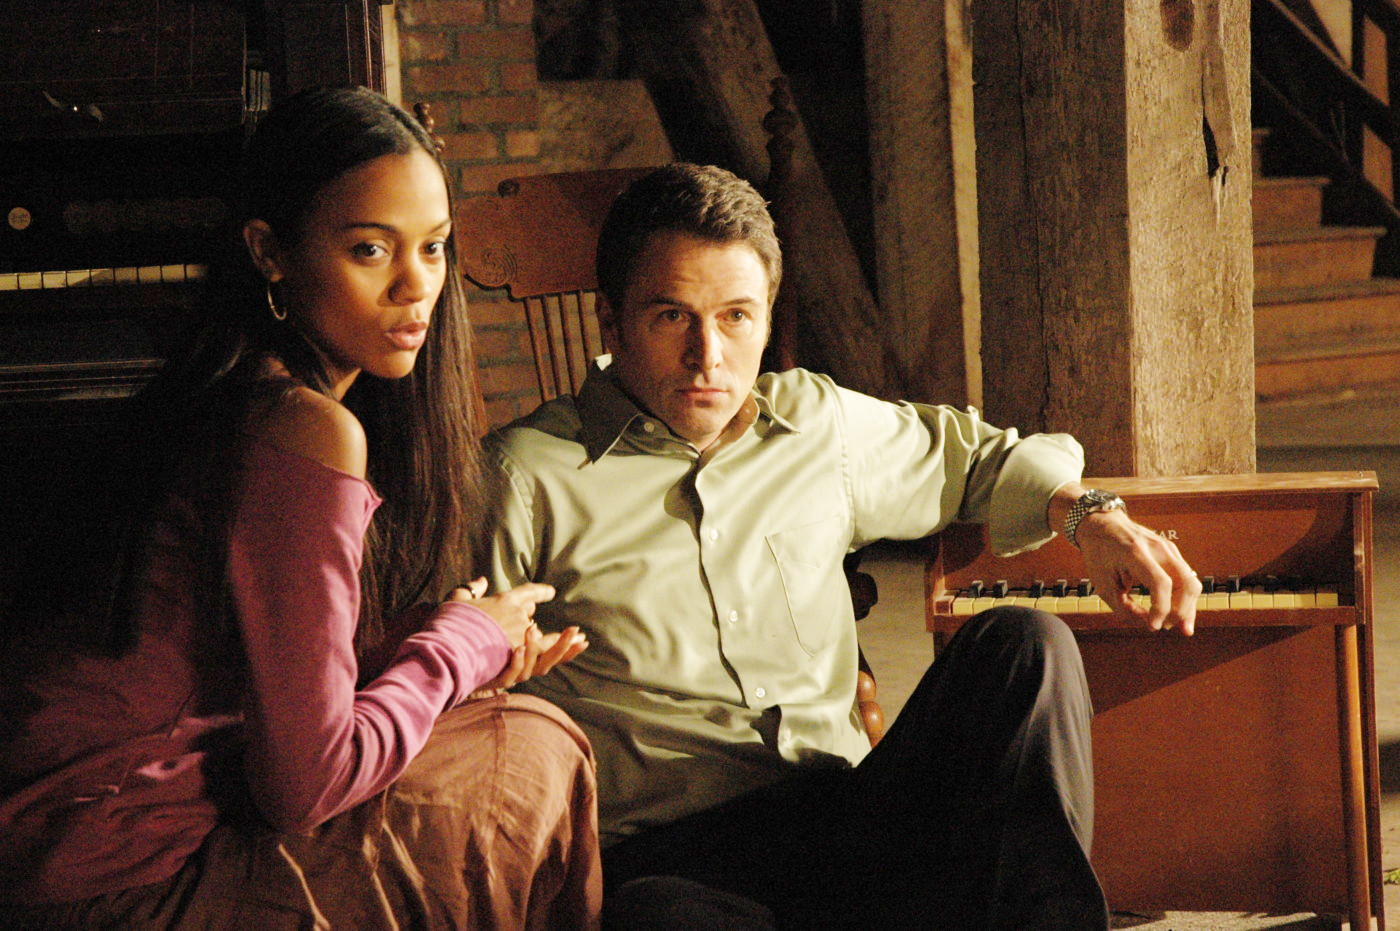 Zoe Saldana stars as Cassie and Tim Daly stars as Bryan Becket in IFC Films' The Skeptic (2009)